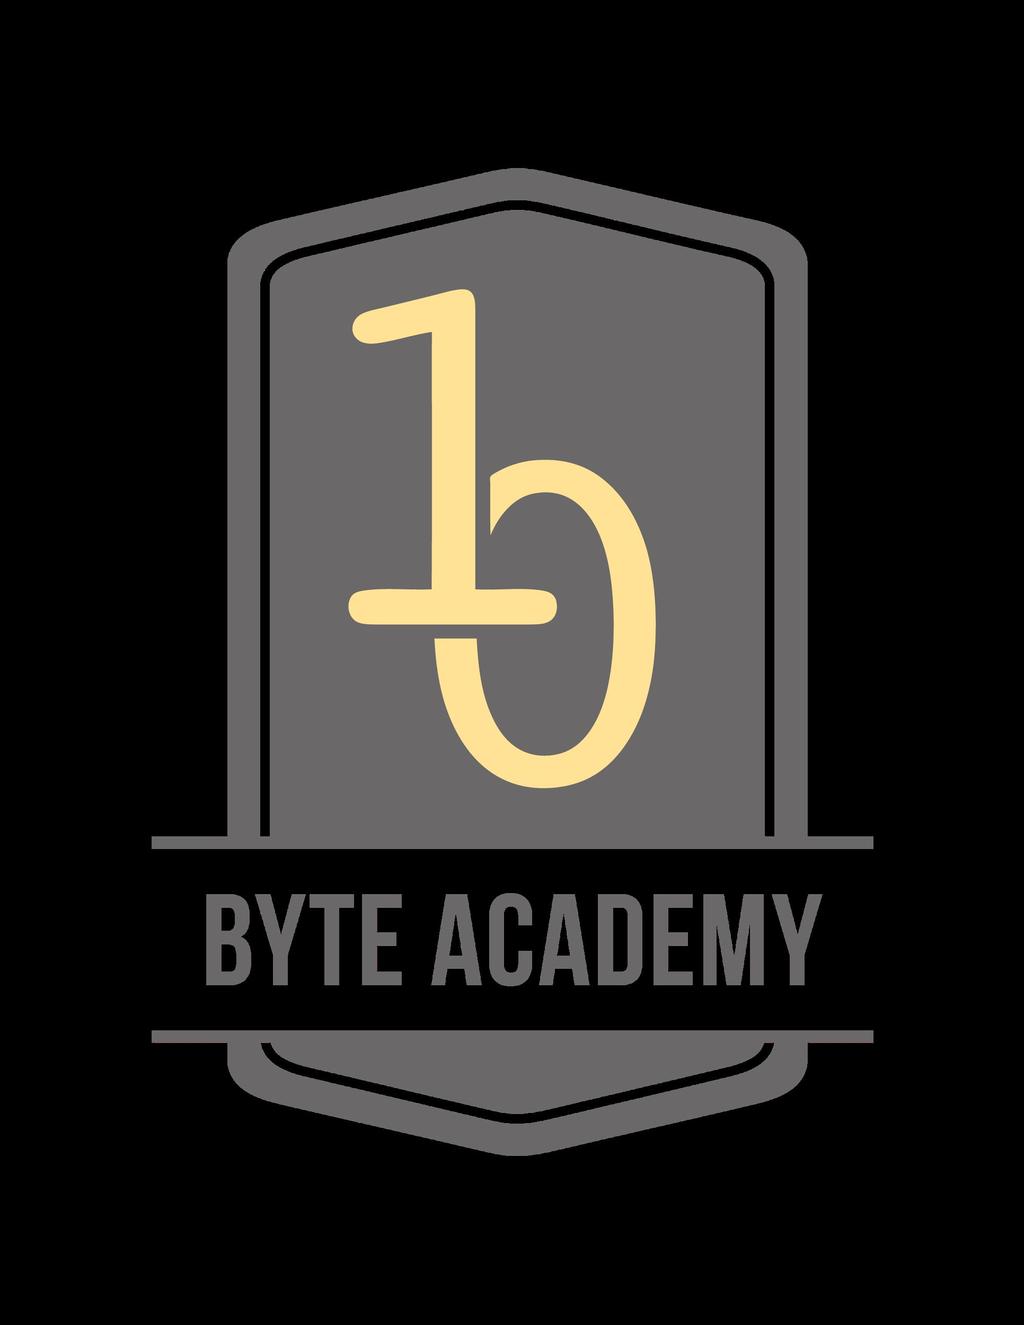 Introduction Byte Academy pioneered industry-focused programs beginning with the launch of our FinTech course, the first of its type.